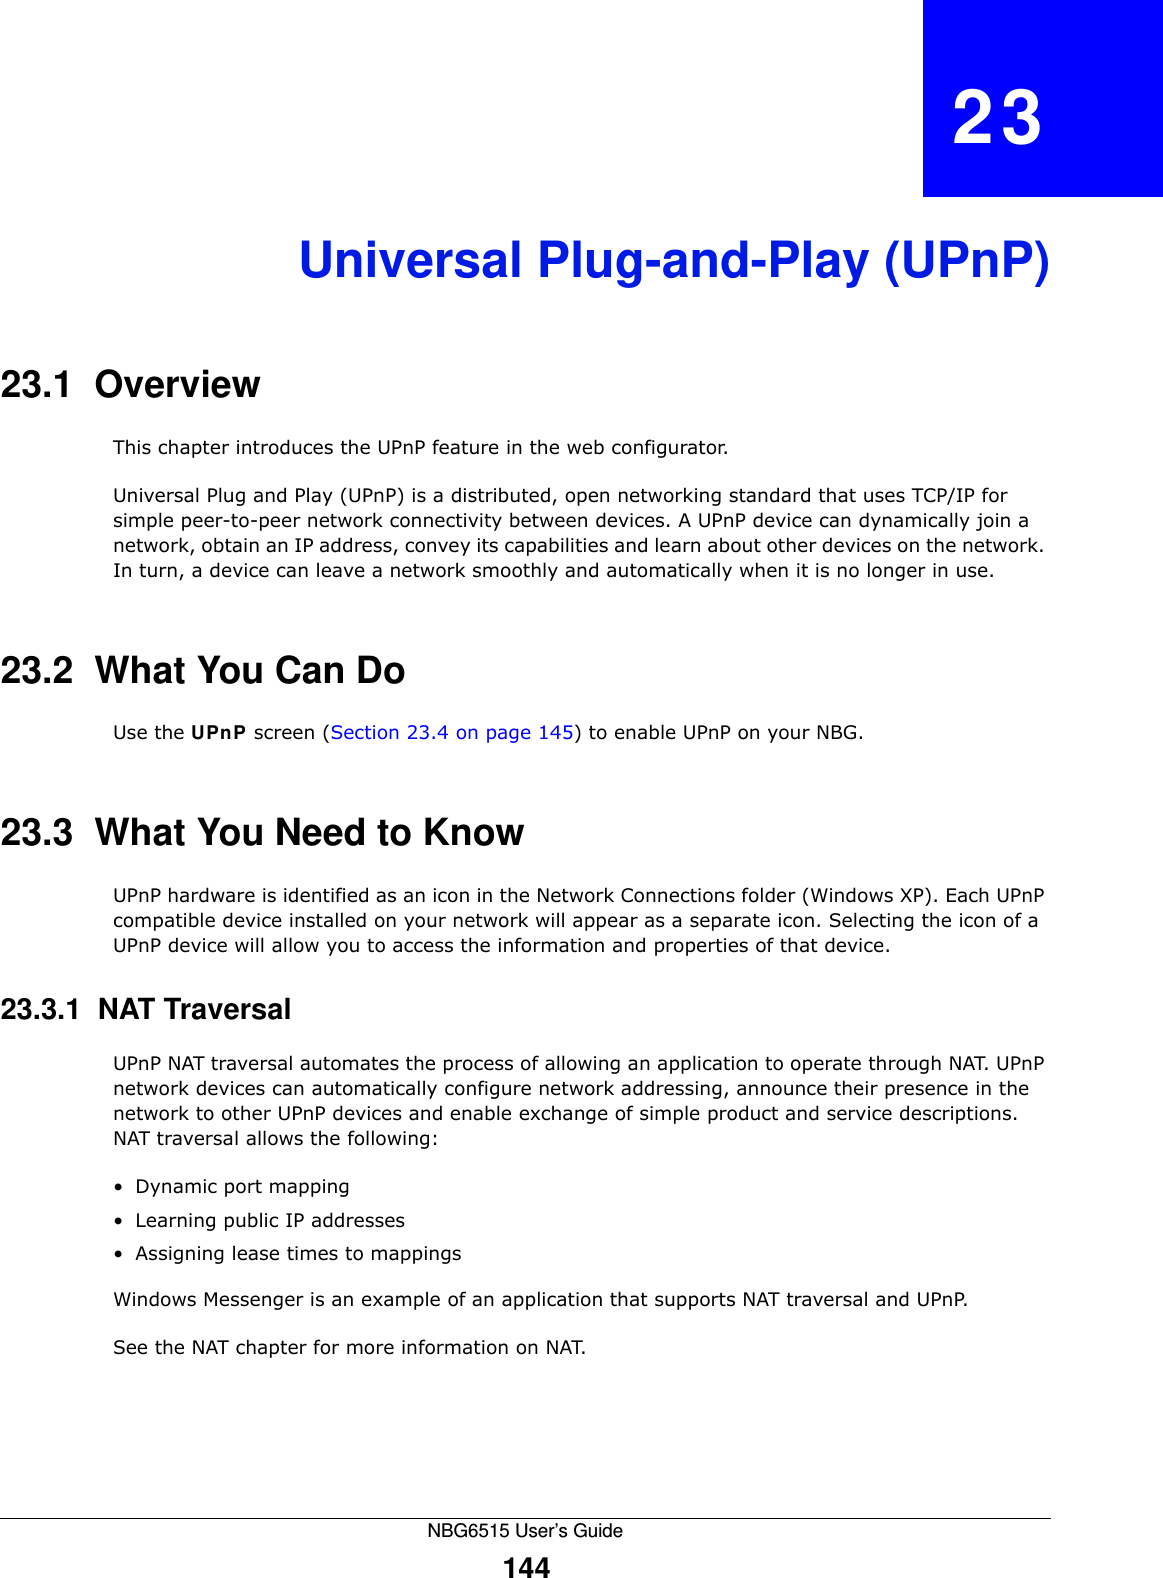 NBG6515 User’s Guide144CHAPTER   23Universal Plug-and-Play (UPnP)23.1  Overview This chapter introduces the UPnP feature in the web configurator.Universal Plug and Play (UPnP) is a distributed, open networking standard that uses TCP/IP for simple peer-to-peer network connectivity between devices. A UPnP device can dynamically join a network, obtain an IP address, convey its capabilities and learn about other devices on the network. In turn, a device can leave a network smoothly and automatically when it is no longer in use.23.2  What You Can DoUse the UPnP screen (Section 23.4 on page 145) to enable UPnP on your NBG.23.3  What You Need to KnowUPnP hardware is identified as an icon in the Network Connections folder (Windows XP). Each UPnP compatible device installed on your network will appear as a separate icon. Selecting the icon of a UPnP device will allow you to access the information and properties of that device. 23.3.1  NAT TraversalUPnP NAT traversal automates the process of allowing an application to operate through NAT. UPnP network devices can automatically configure network addressing, announce their presence in the network to other UPnP devices and enable exchange of simple product and service descriptions. NAT traversal allows the following:• Dynamic port mapping• Learning public IP addresses• Assigning lease times to mappingsWindows Messenger is an example of an application that supports NAT traversal and UPnP. See the NAT chapter for more information on NAT.